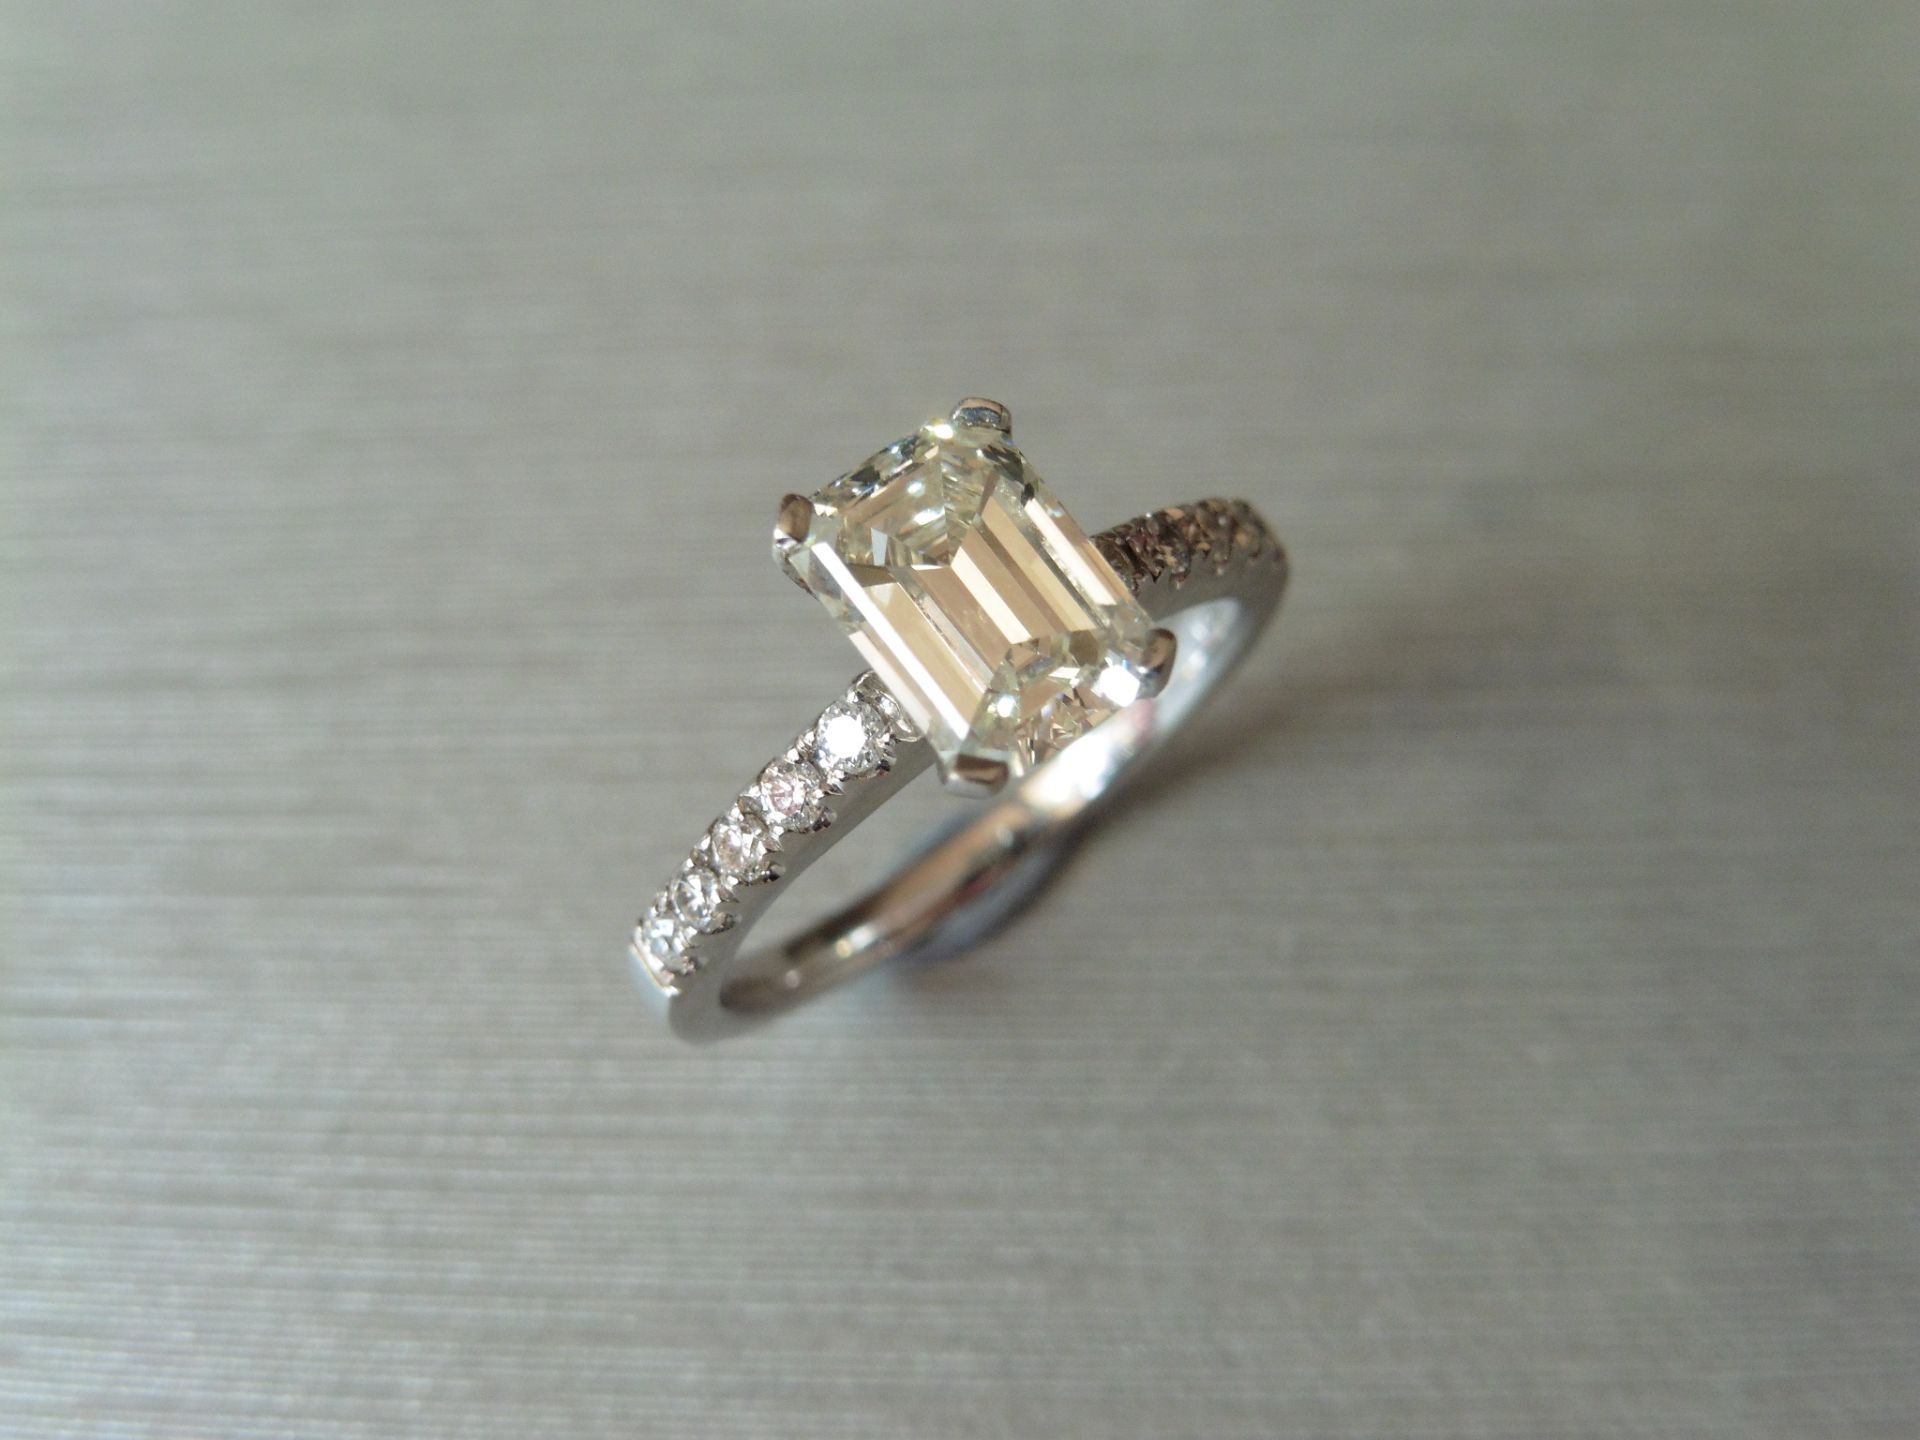 1.50ct emerald cut diamond solitaire ring. Centre stone is I/J colour and VS clarity. Four claw